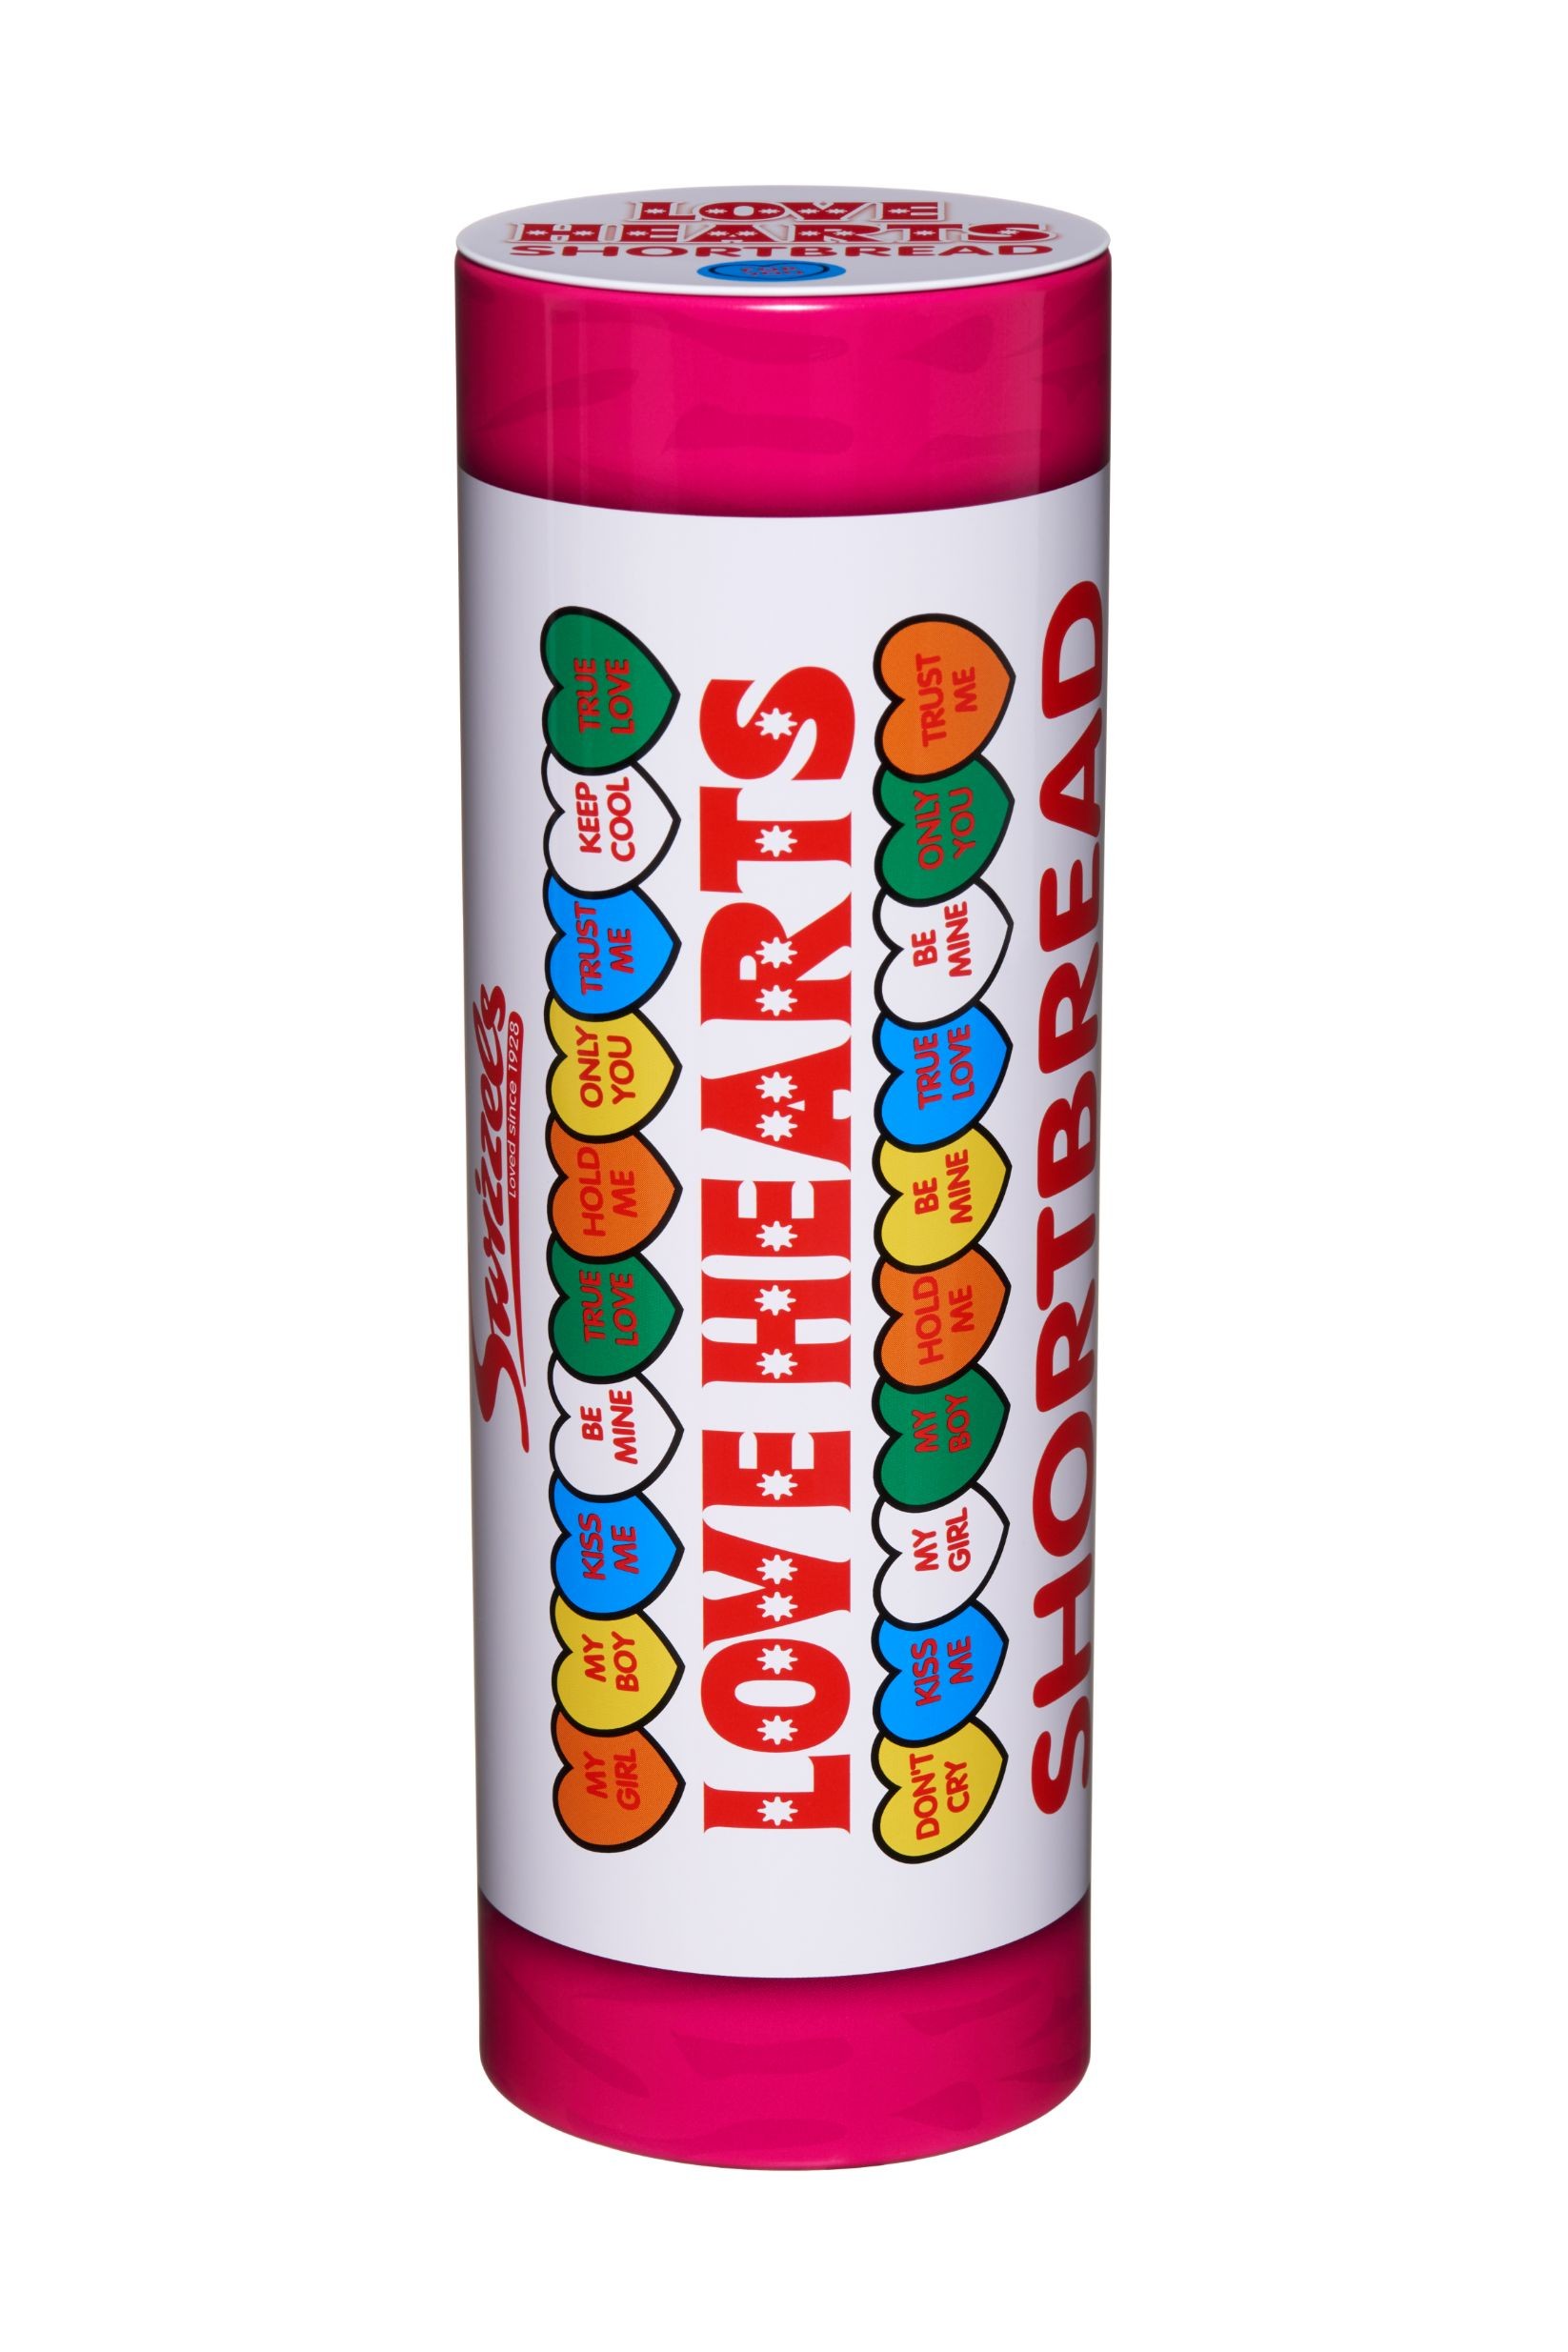 LOVE HEARTS SHORTBREAD BISCUITS GIFT TIN (SWIZZELS) 150G